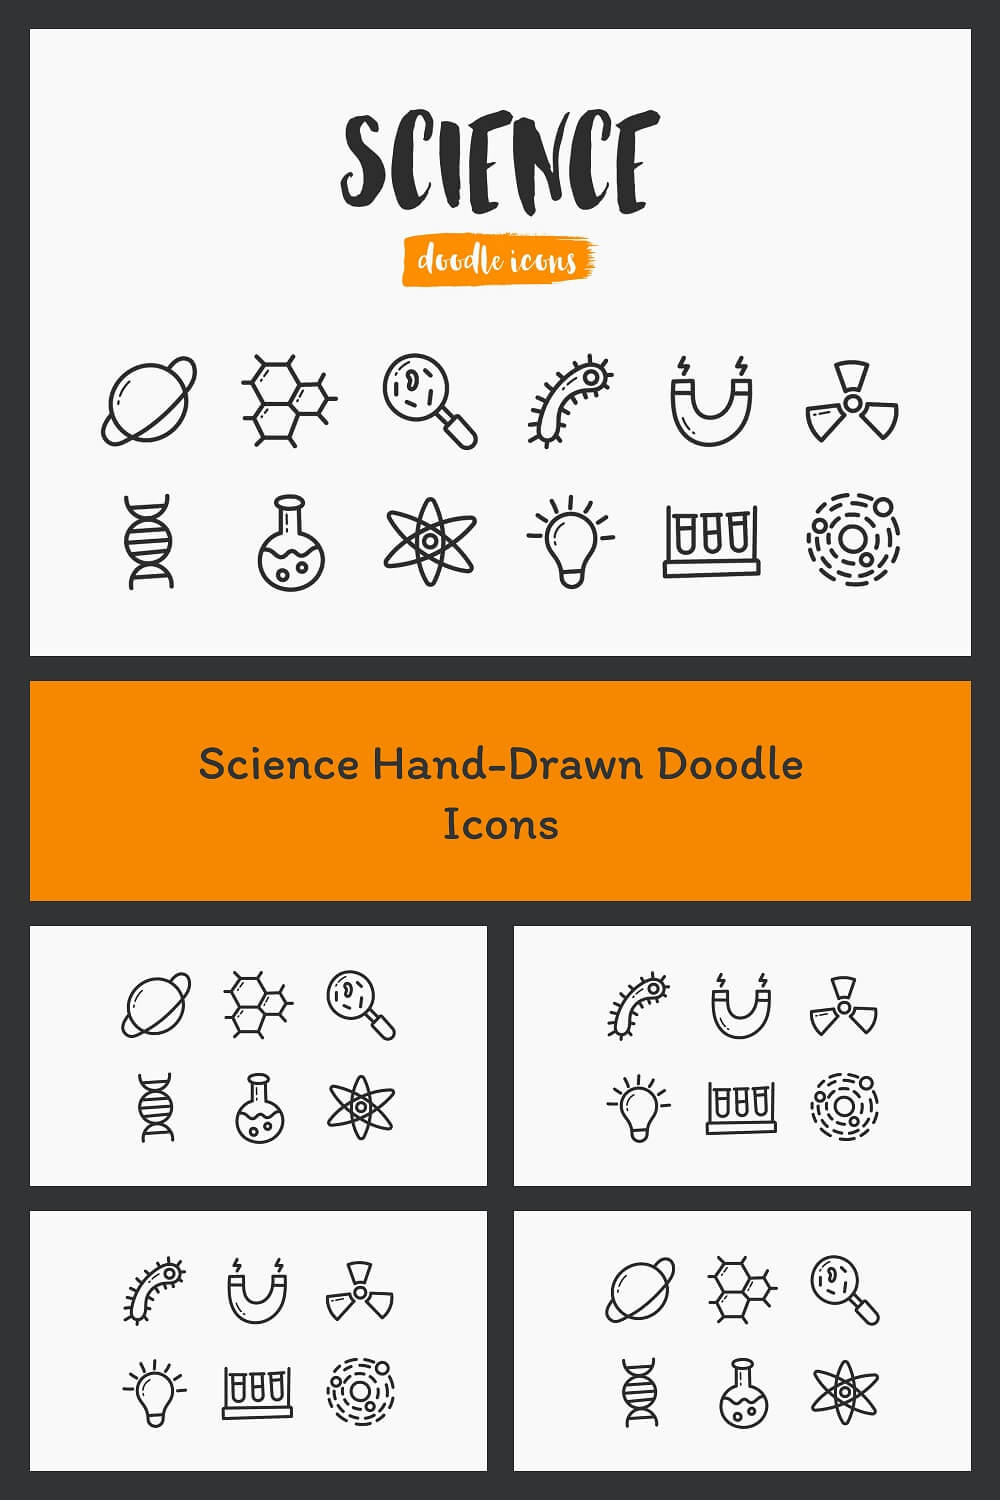 Chemistry icons on the white background.